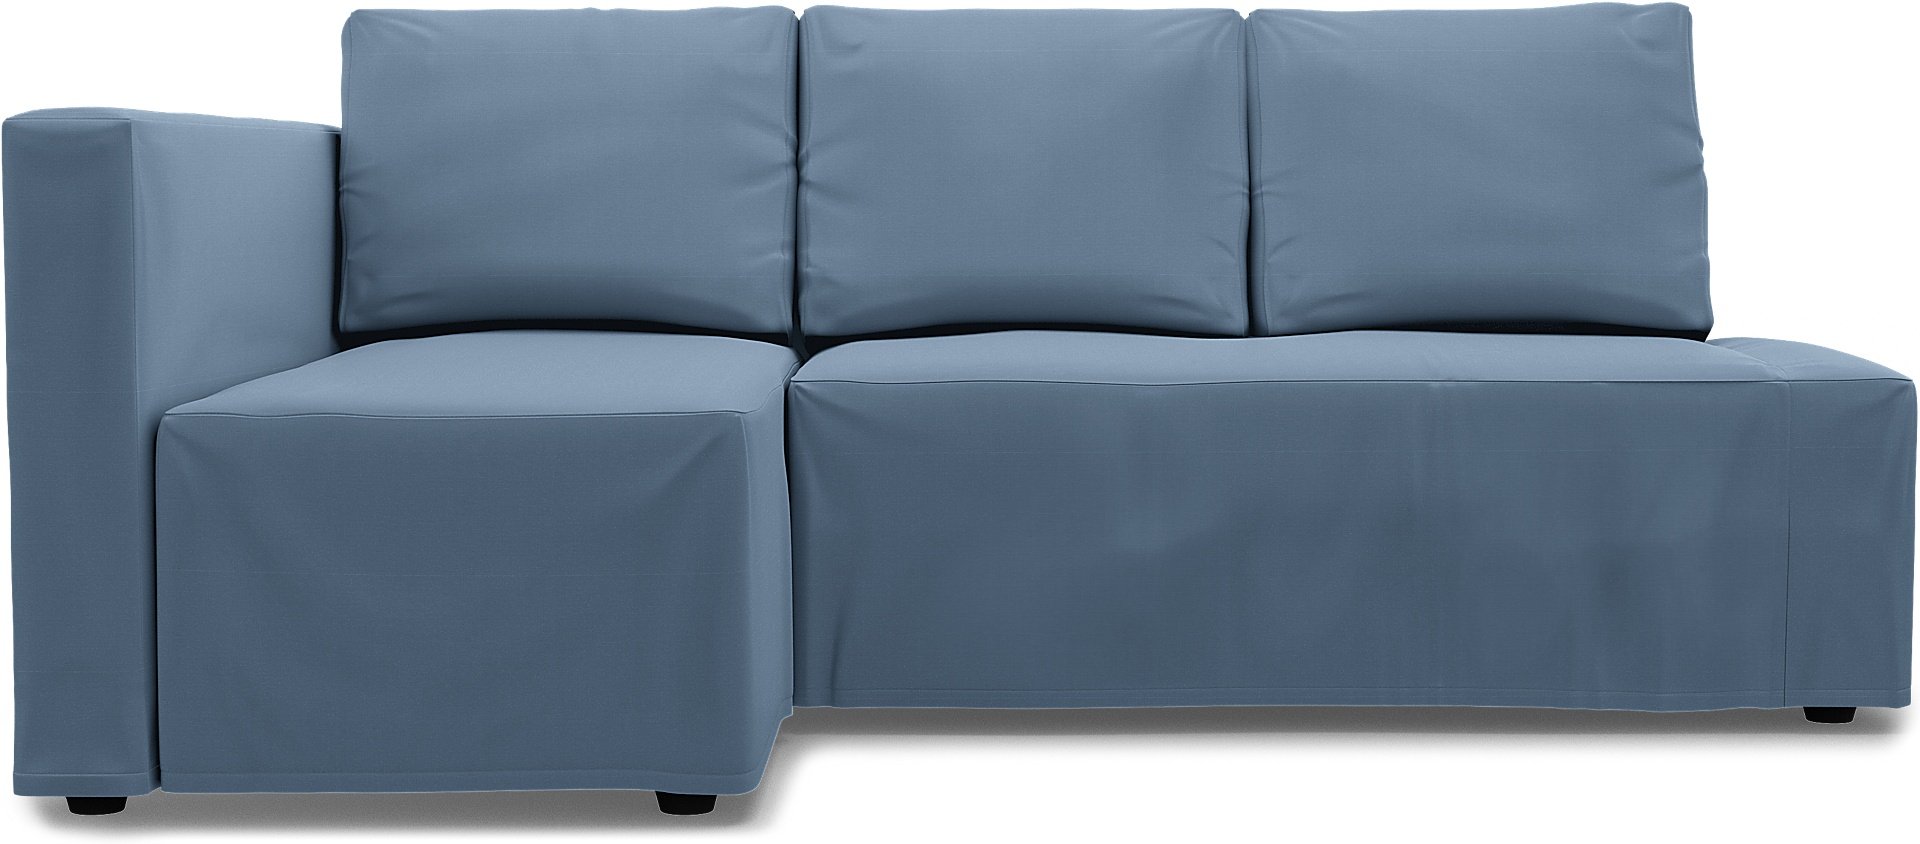 IKEA - Friheten Sofa Bed with Left Chaise Cover, Dusty Blue, Cotton - Bemz